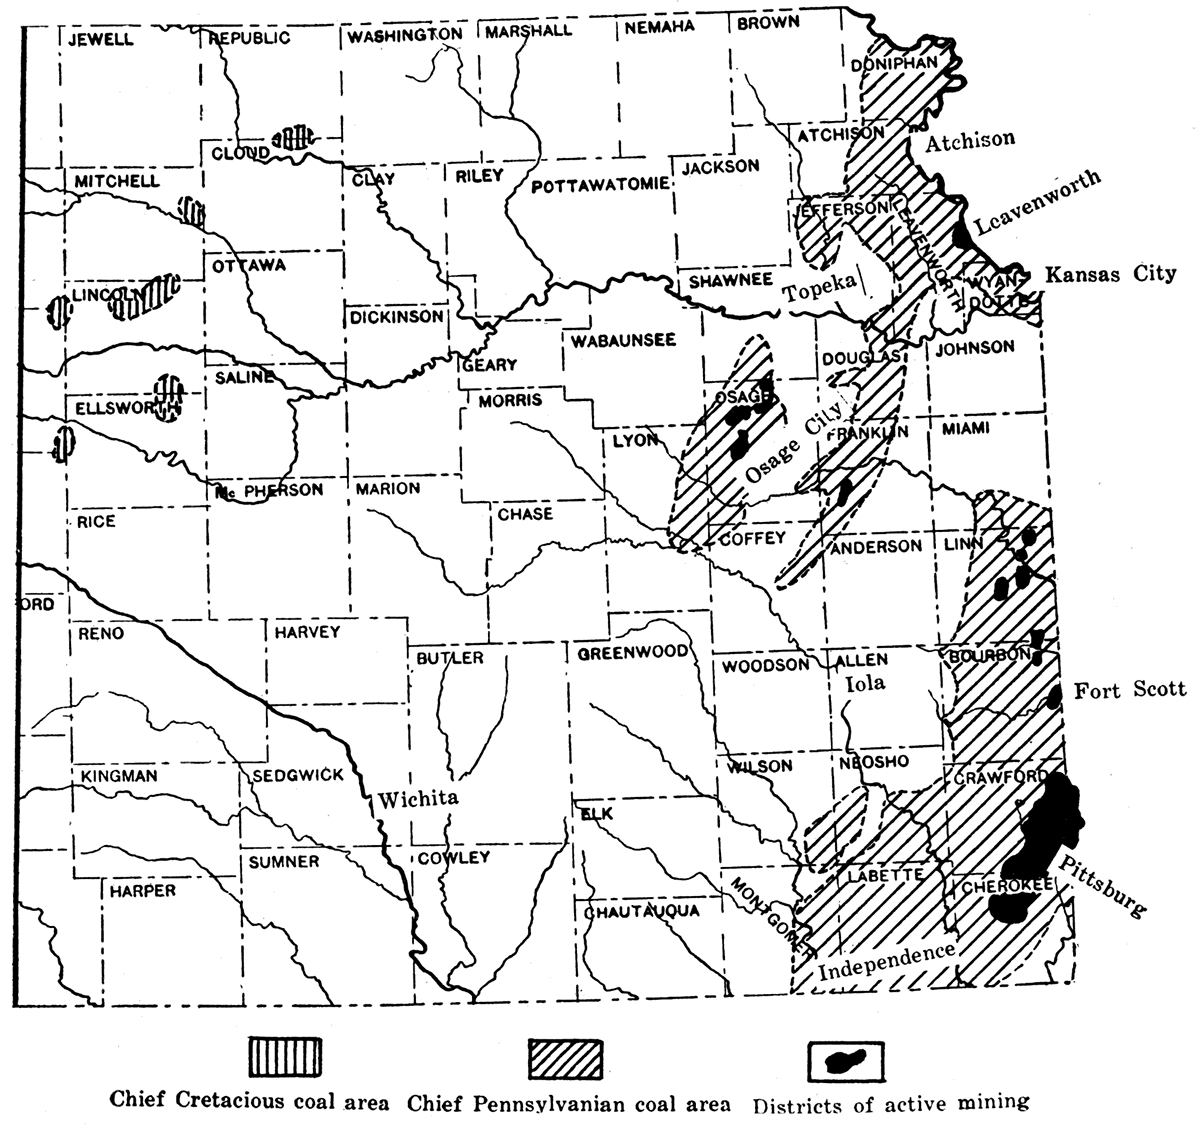 Map of eastern Kansas, showing chief coal-producing areas and active mining districts.